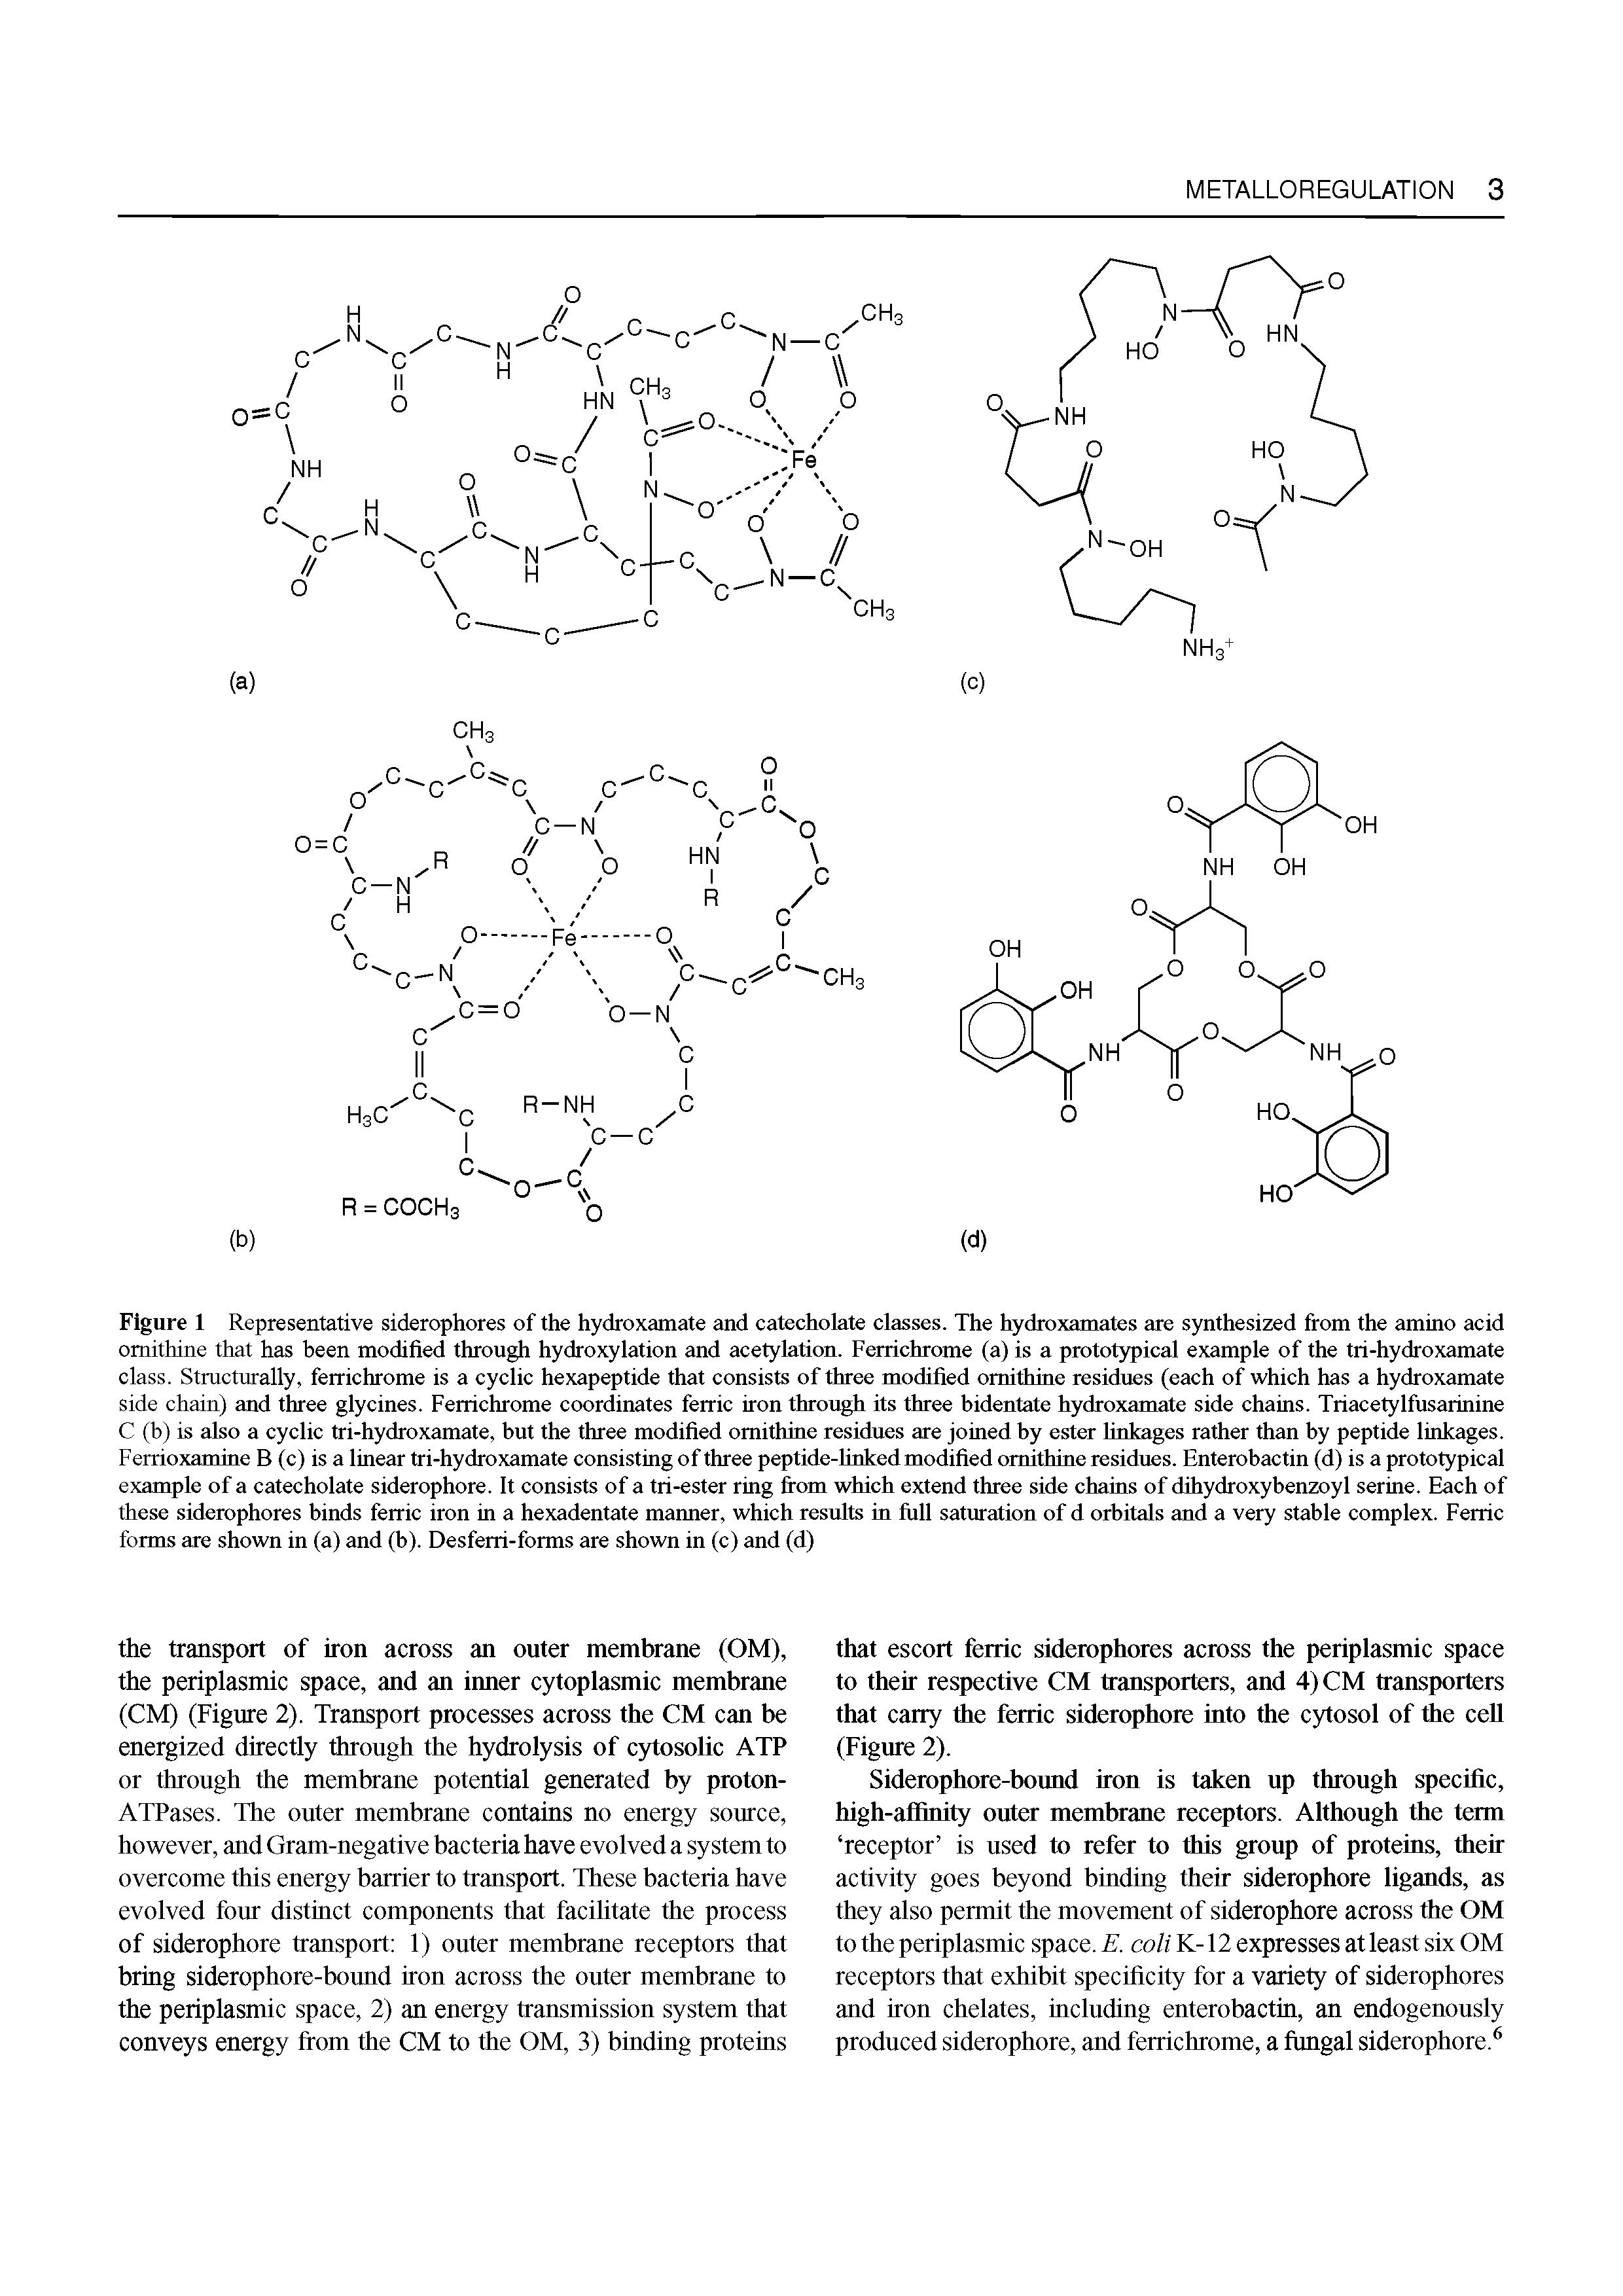 Figure 1 Representative siderophores of the hydroxamate and catecholate classes. The hydroxamates are synthesized from the amino acid ornithine that has been modified through hydroxylation and acetylation. Ferrichrome (a) is a prototypical example of the tri-hydroxamate class. Structurally, ferrichrome is a cyclic hexapeptide that consists of three modified ornithine residues (each of which has a hydroxamate side chain) and three glycines. Ferrichrome coordinates ferric iron through its three bidentate hydroxamate side chains. Triacetylfusarinine C (b) is also a cyclic tri-hydroxamate, but the three modified ornithine residues are joined by ester linkages rather than by peptide linkages. Ferrioxamine B (c) is a linear tri-hydroxamate consisting of three peptide-huked modified ornithine residues. Enterobactin (d) is a prototypical example of a catecholate siderophore. It consists of a tri-ester ring from which extend three side chains of chhydroxybenzoyl serine. Each of these siderophores binds ferric iron in a hexadentate manner, which results in full saturation of d orbitals and a very stable complex. Ferric forms are shown in (a) and (b). Desferri-forms are shown in (c) and (d)...